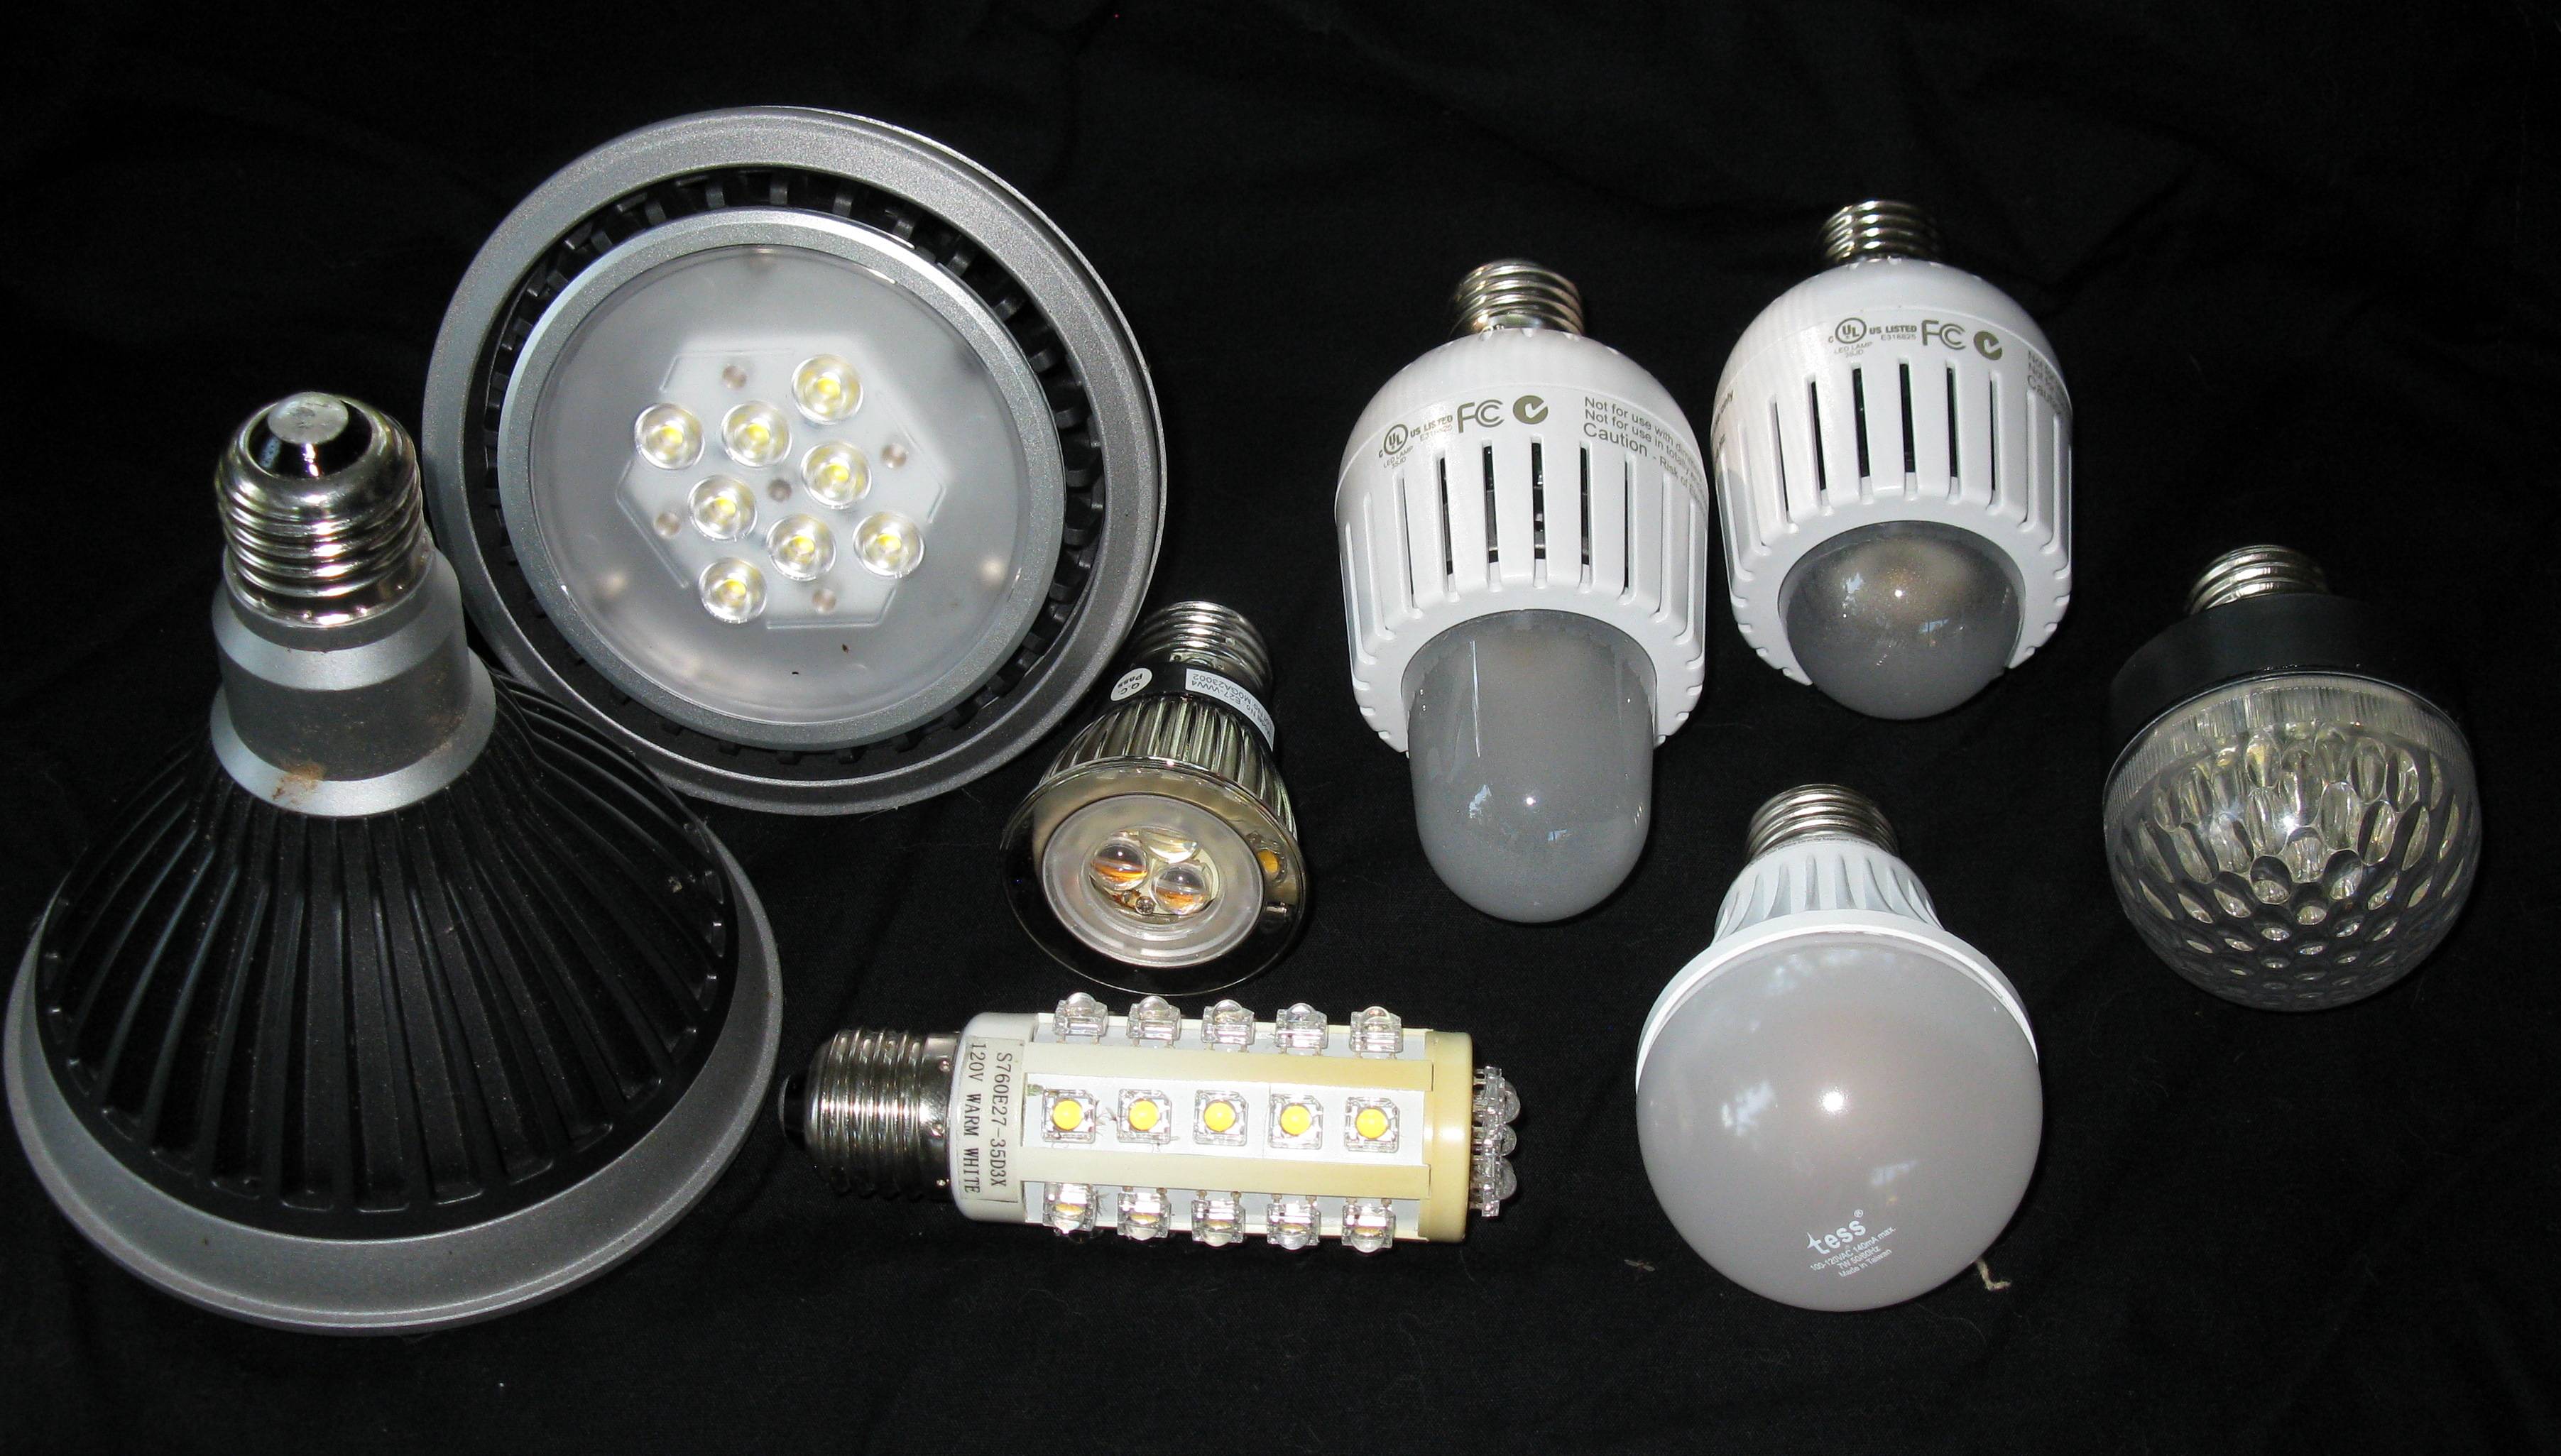 About LED – Part One